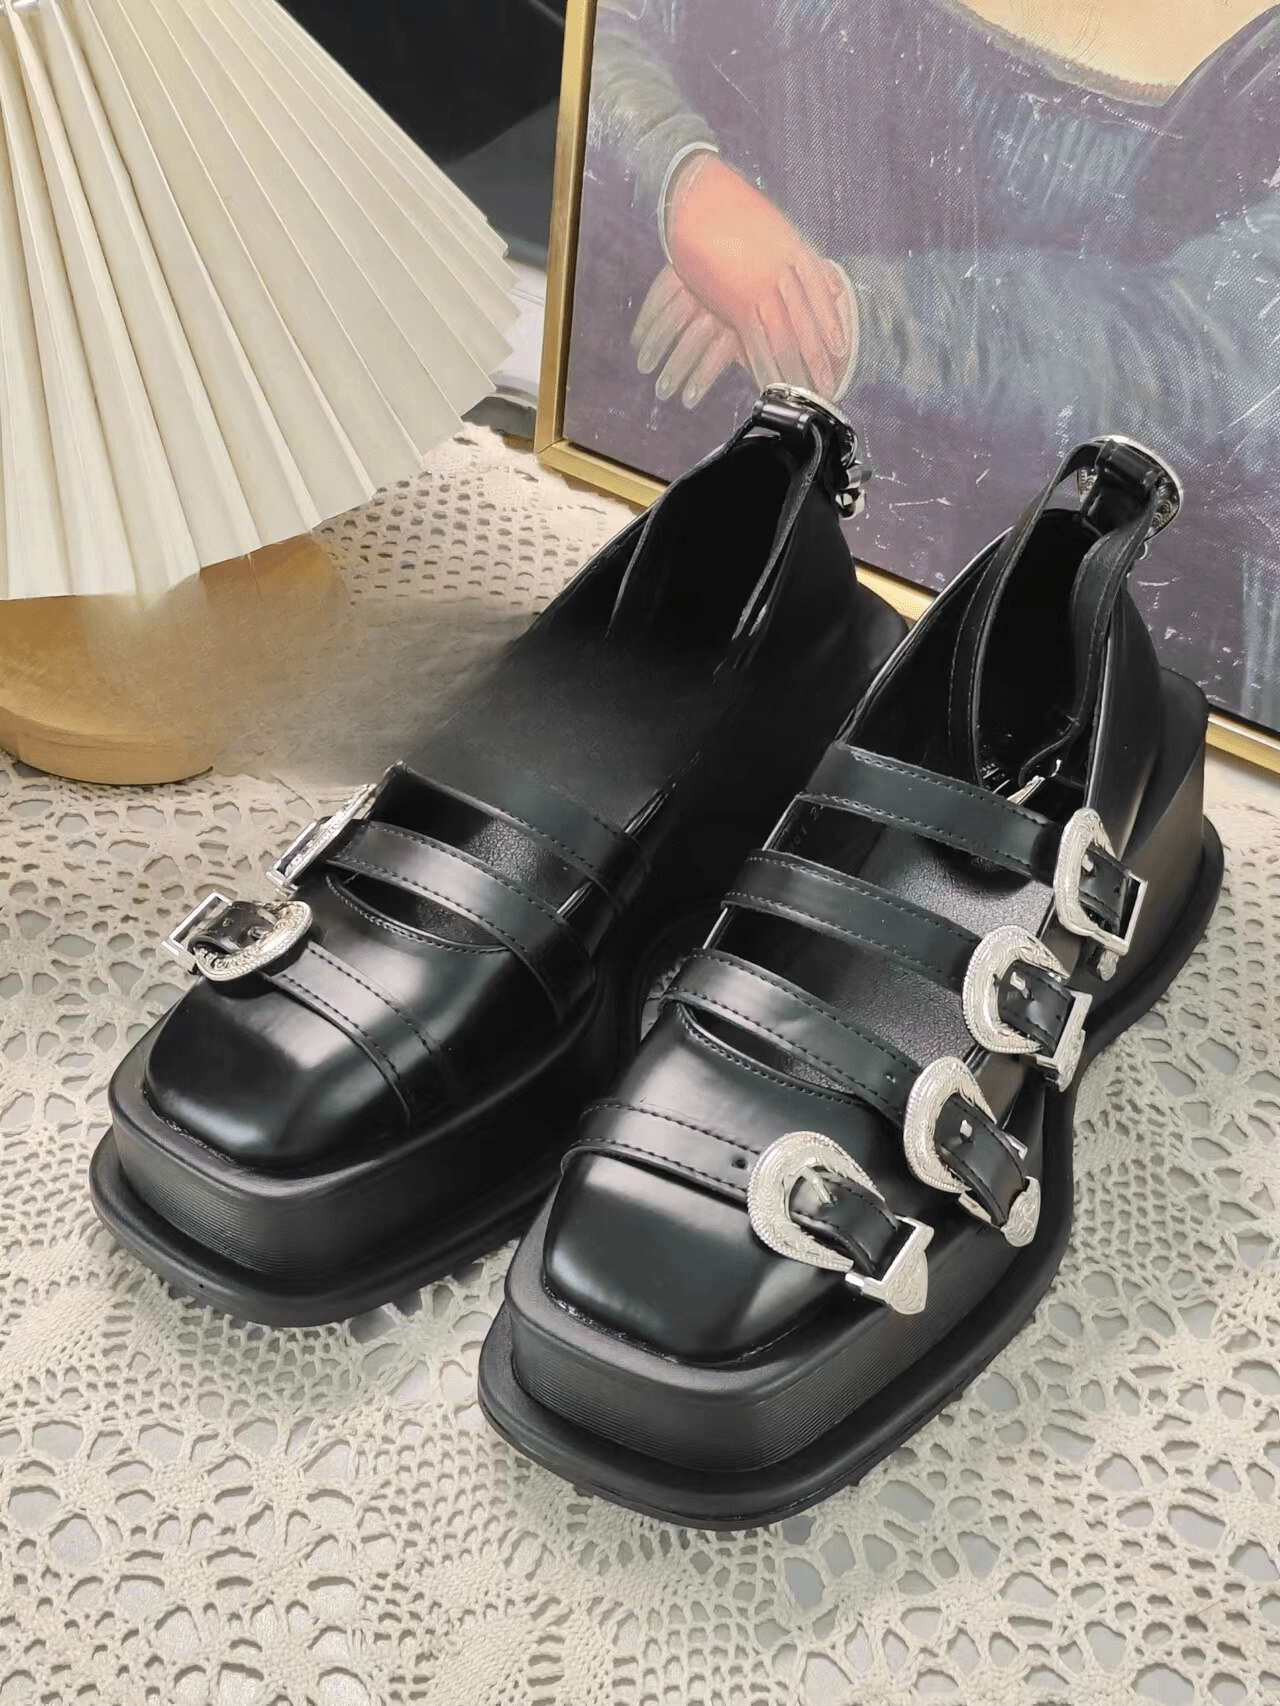 Belt Buckle Black Leather Shoes for Women Sandals Pumps Mary Jane